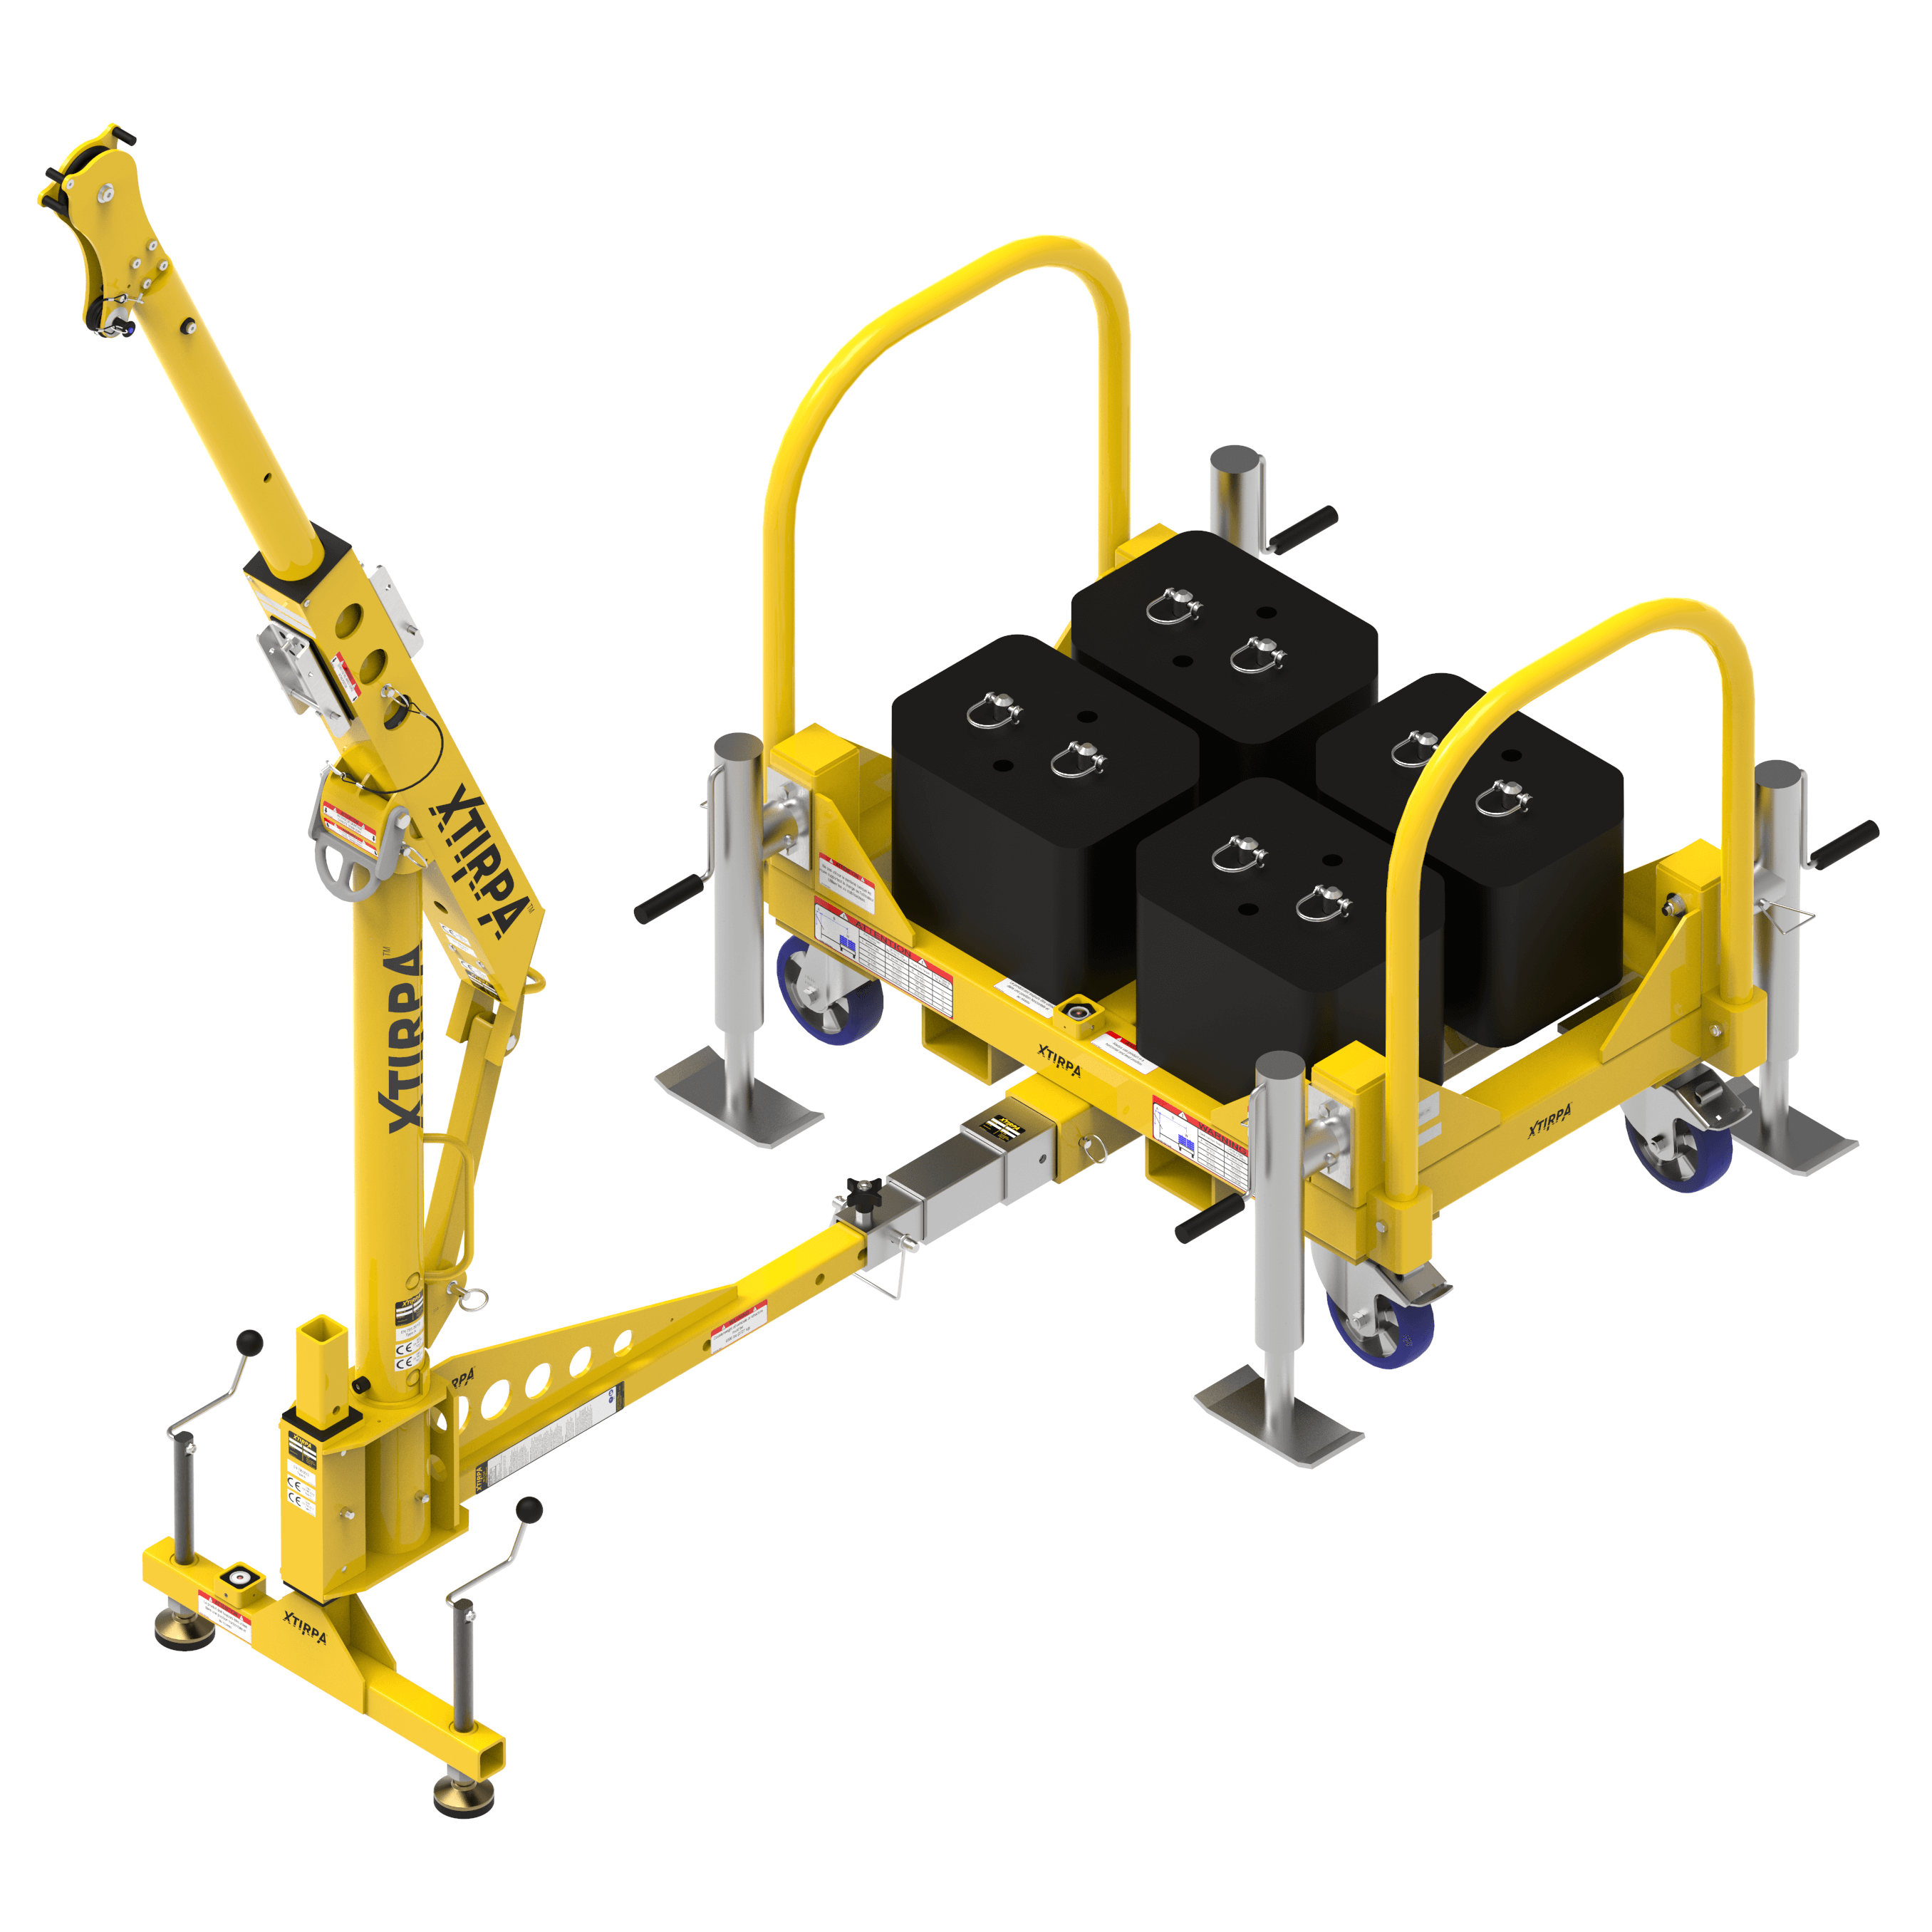 Counterweight 610mm Arm Davit System c/w Fall Arrest Recovery Device, Man Riding Winch & Brackets